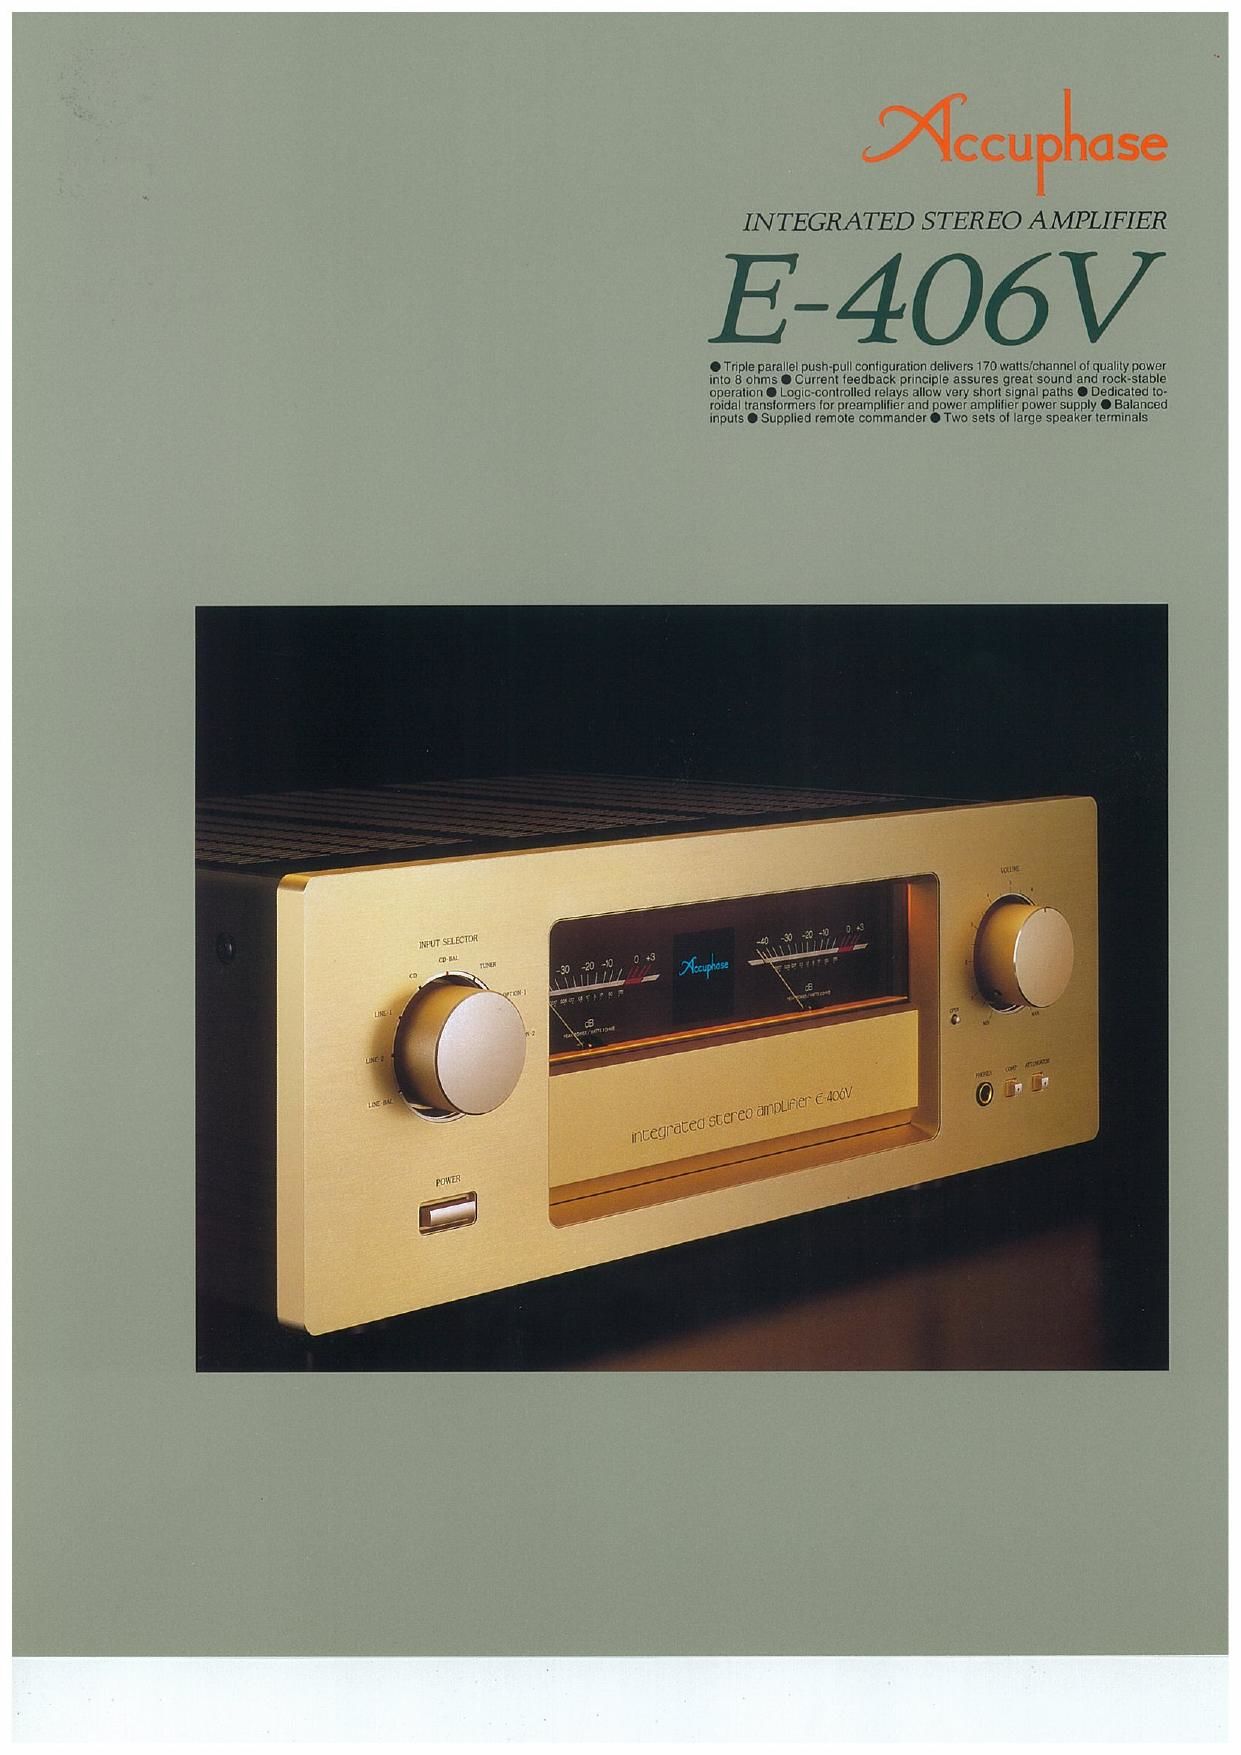 Accuphase E 406 V Brochure